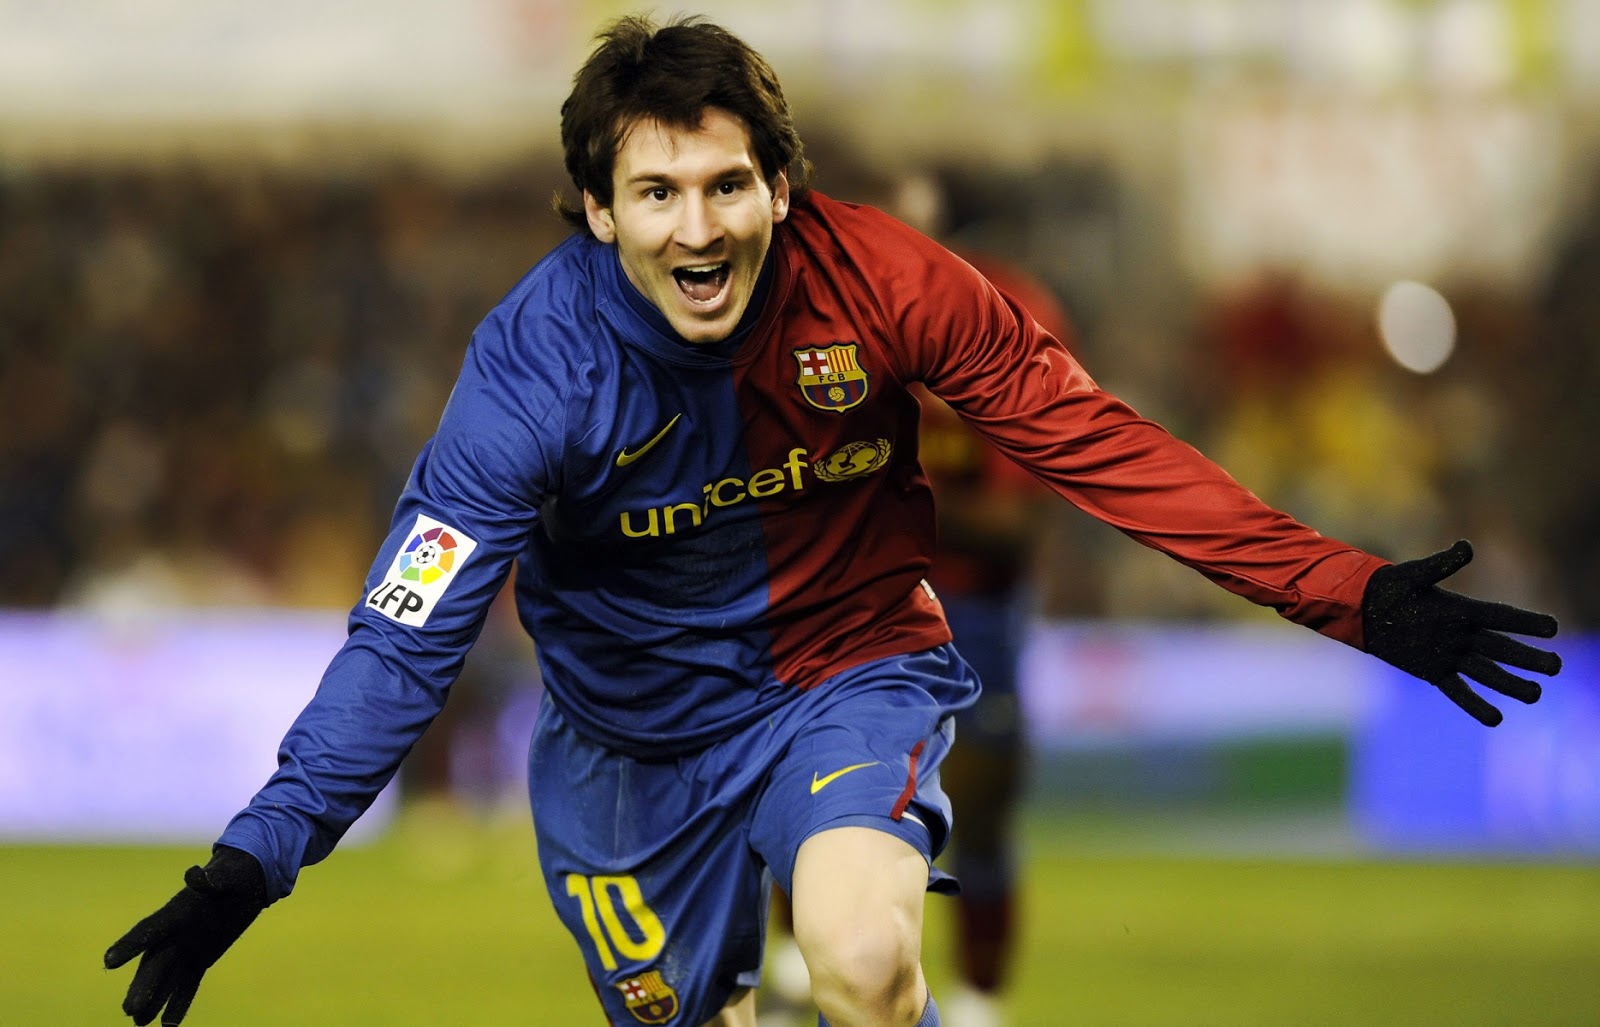 Lionel Messi Football Player Latest Hd Wallpapers 2013 ...